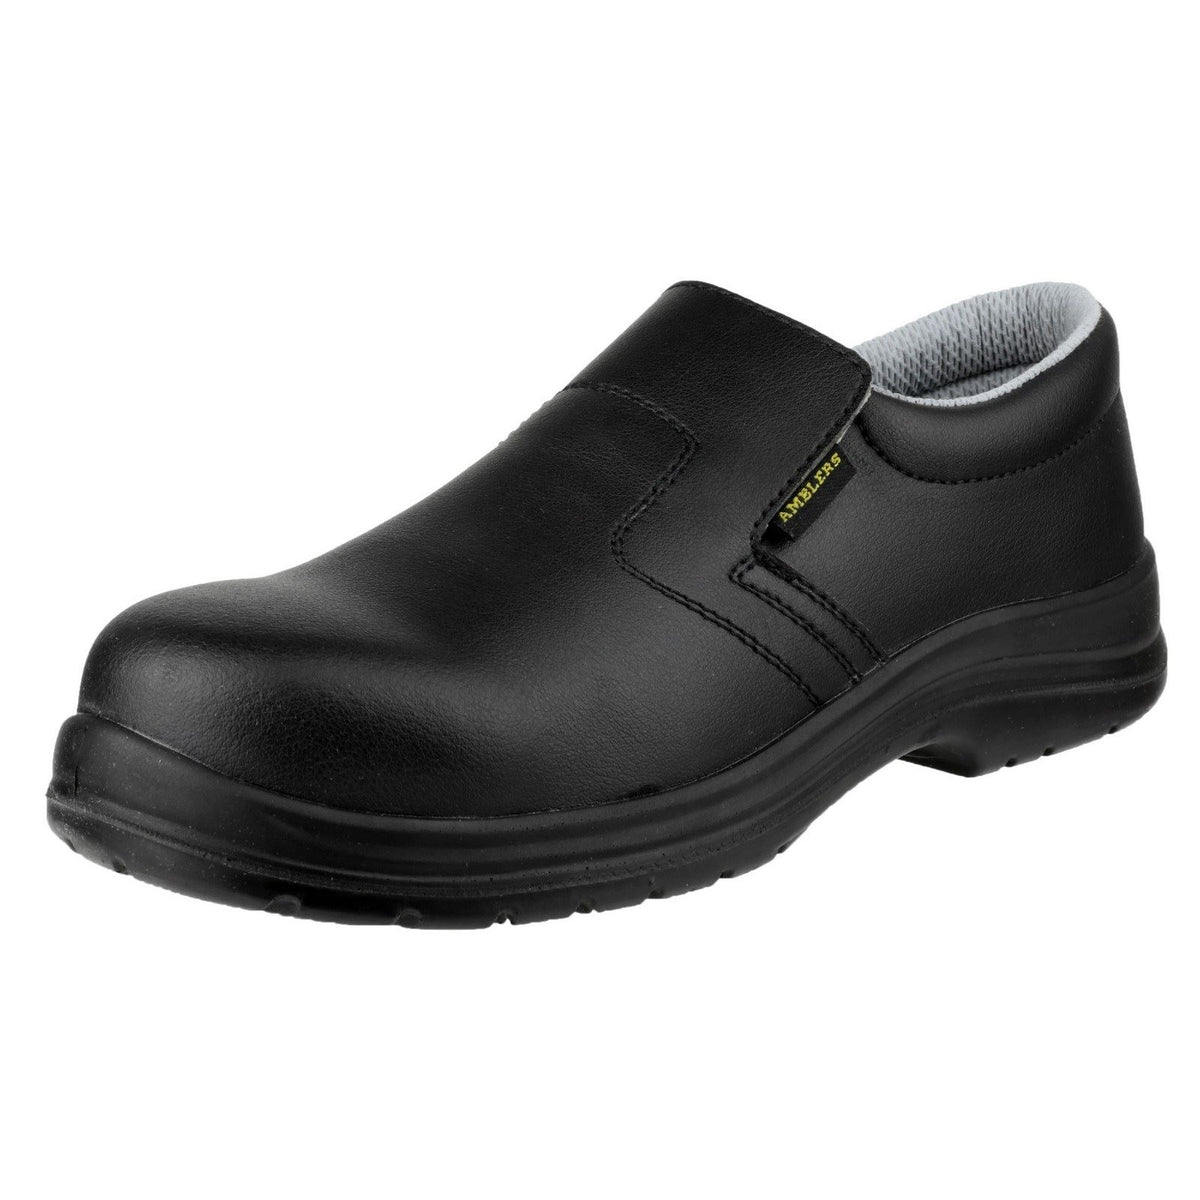 Amblers Safety FS661 Metal Free Lightweight safety Shoes